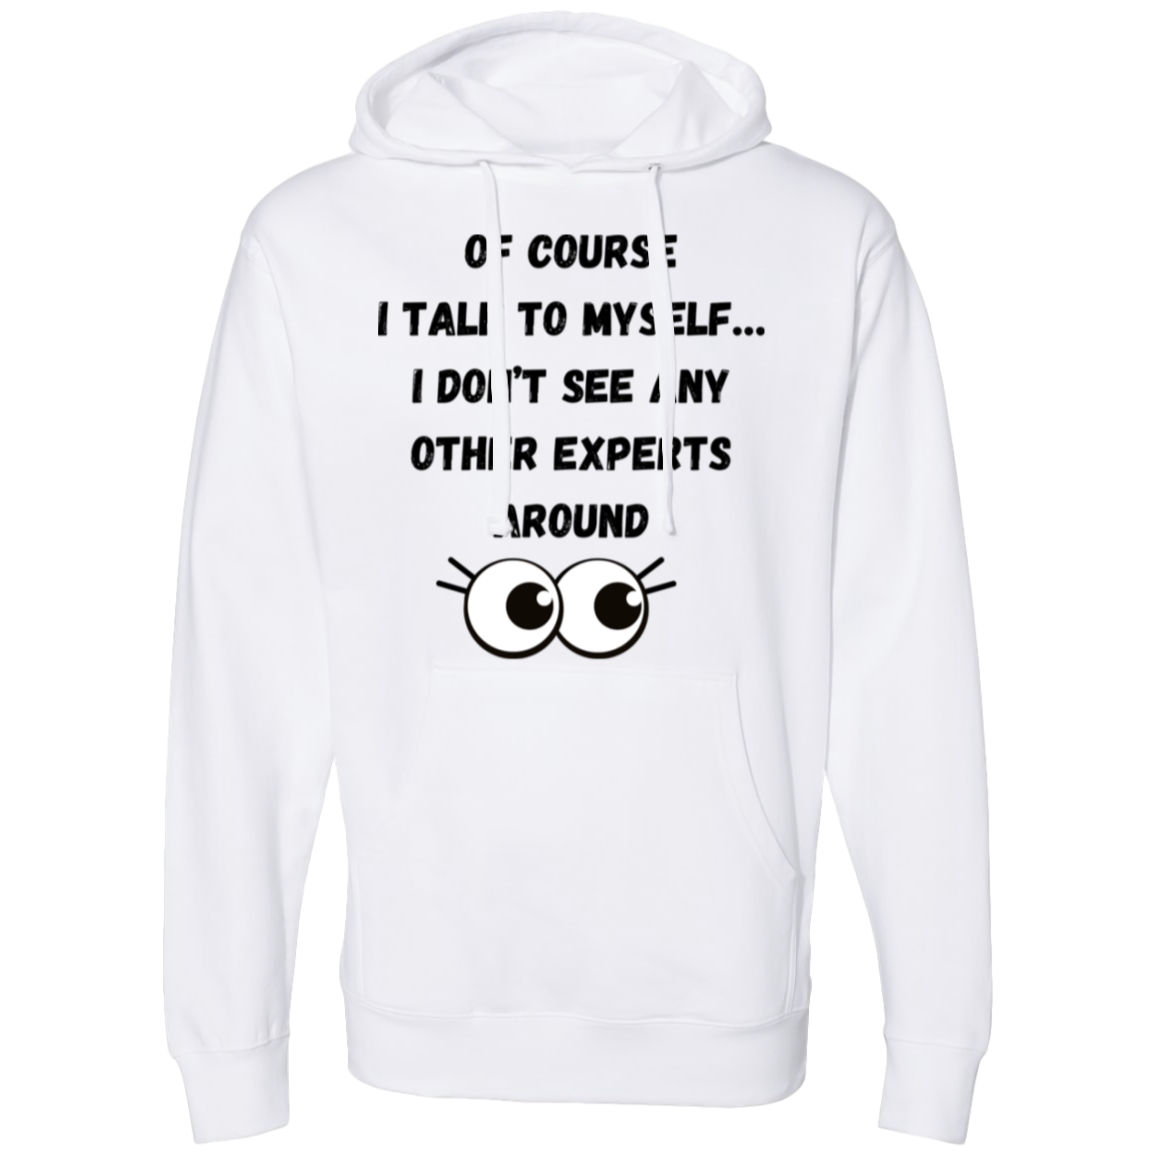 Of course I talk to myself… I don’t see any other experts around  Hooded Sweatshirt